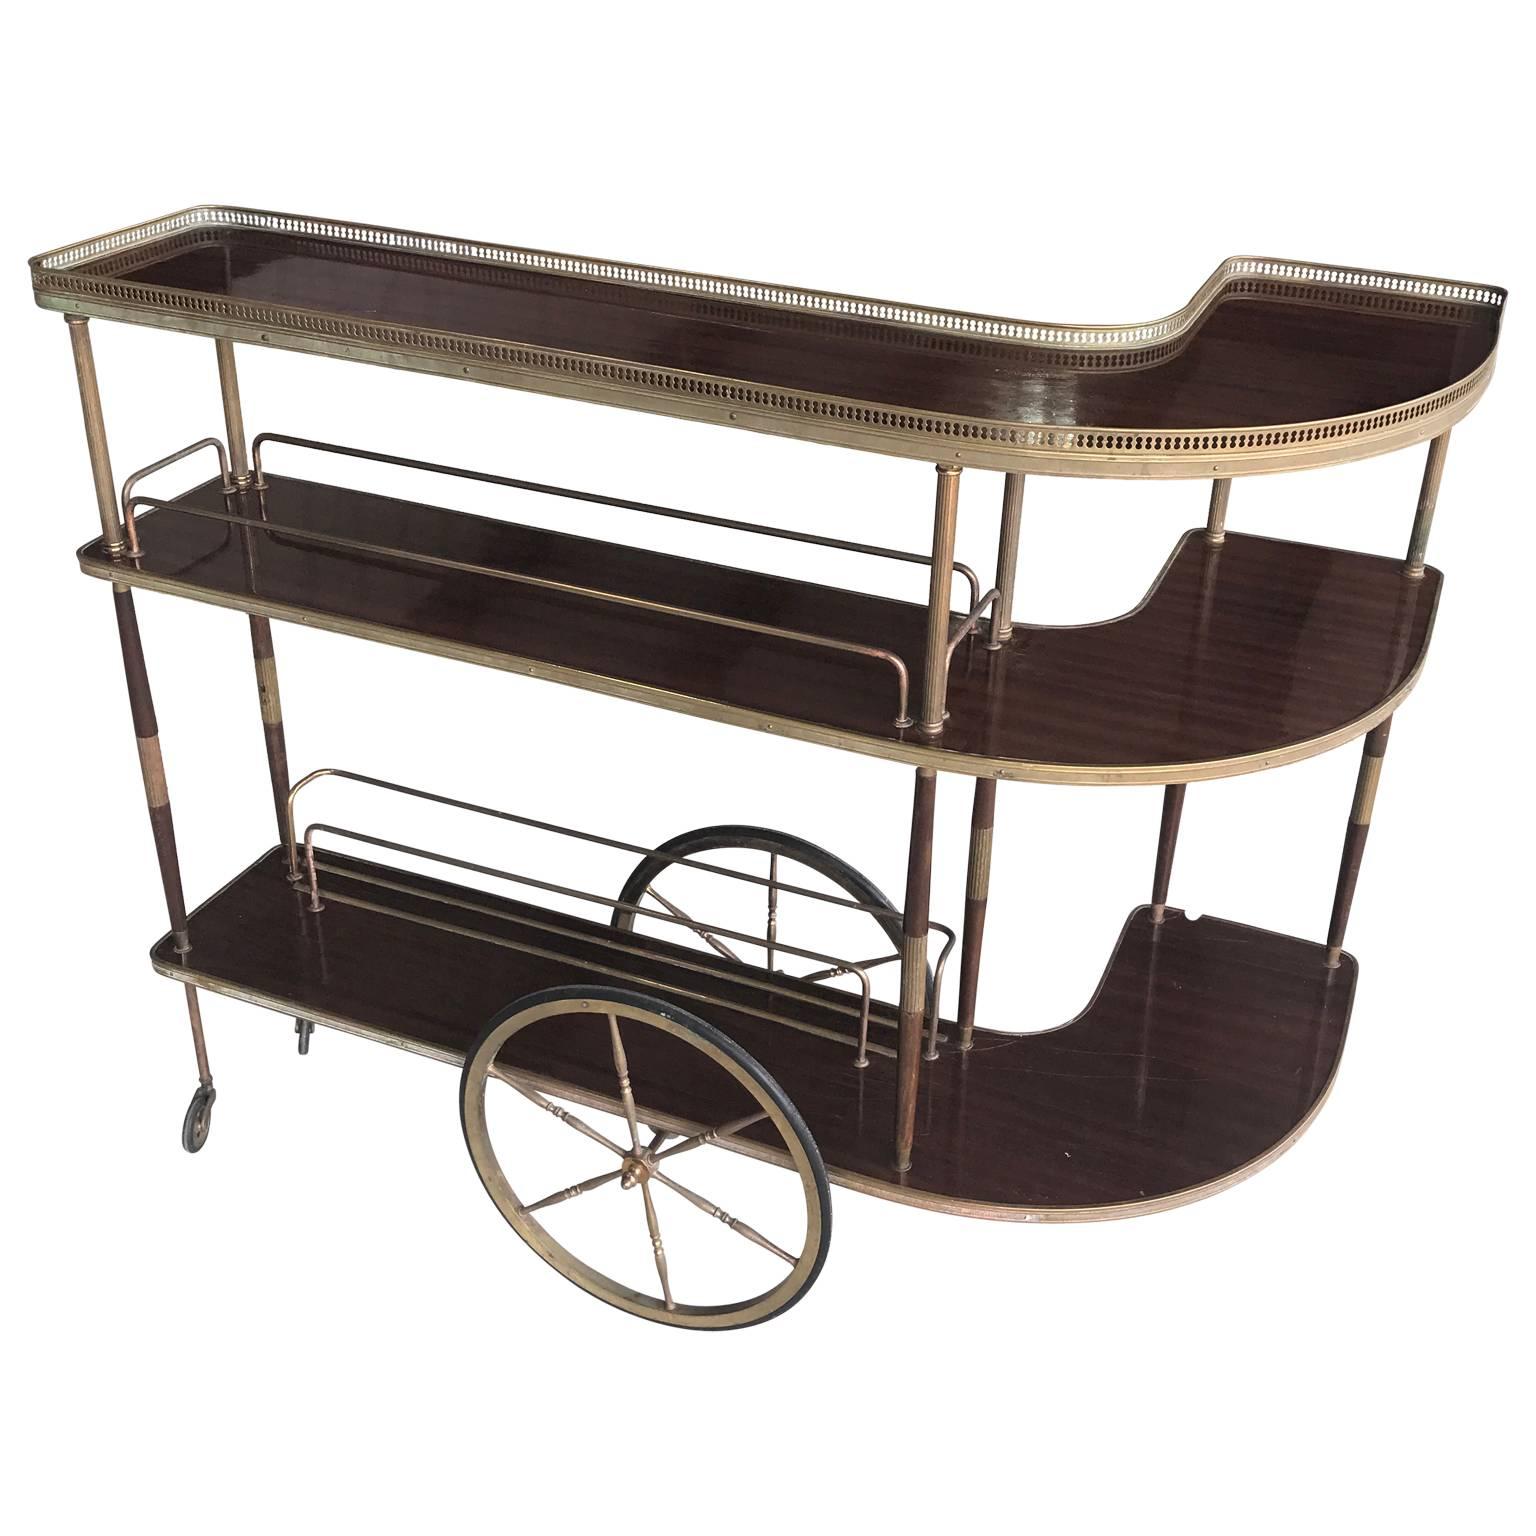 Rare three-tiered neoclassical mahogany and brass drinks trolley.
       